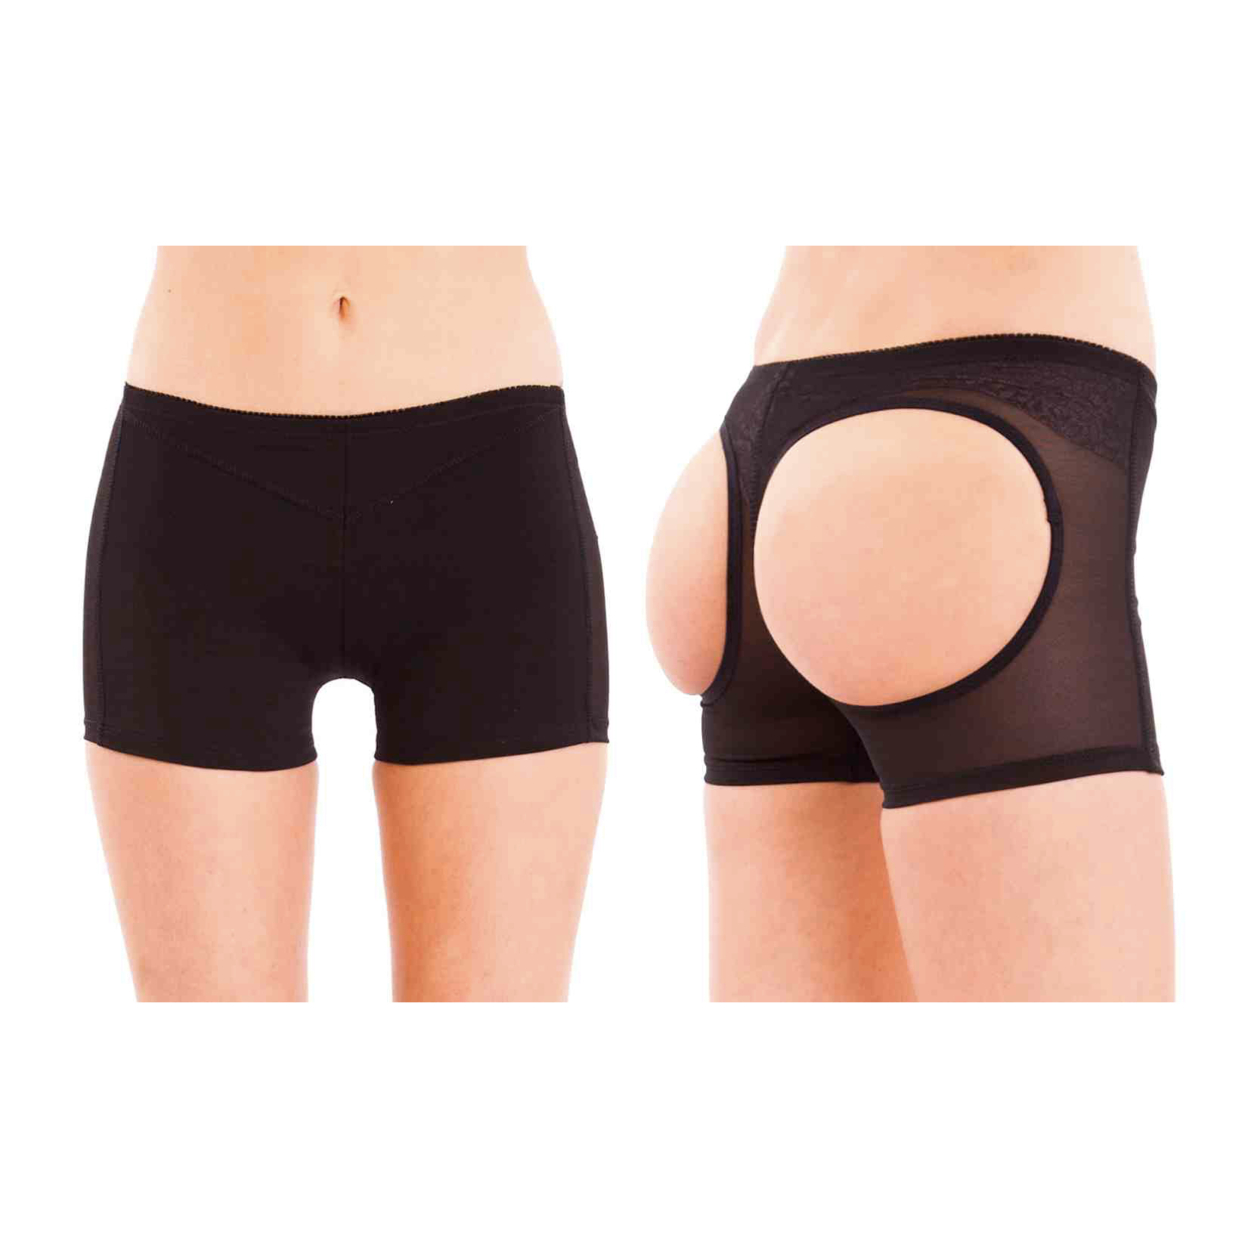 Women's Butt-Lifting And Tummy-Control Brief - Beige, XL